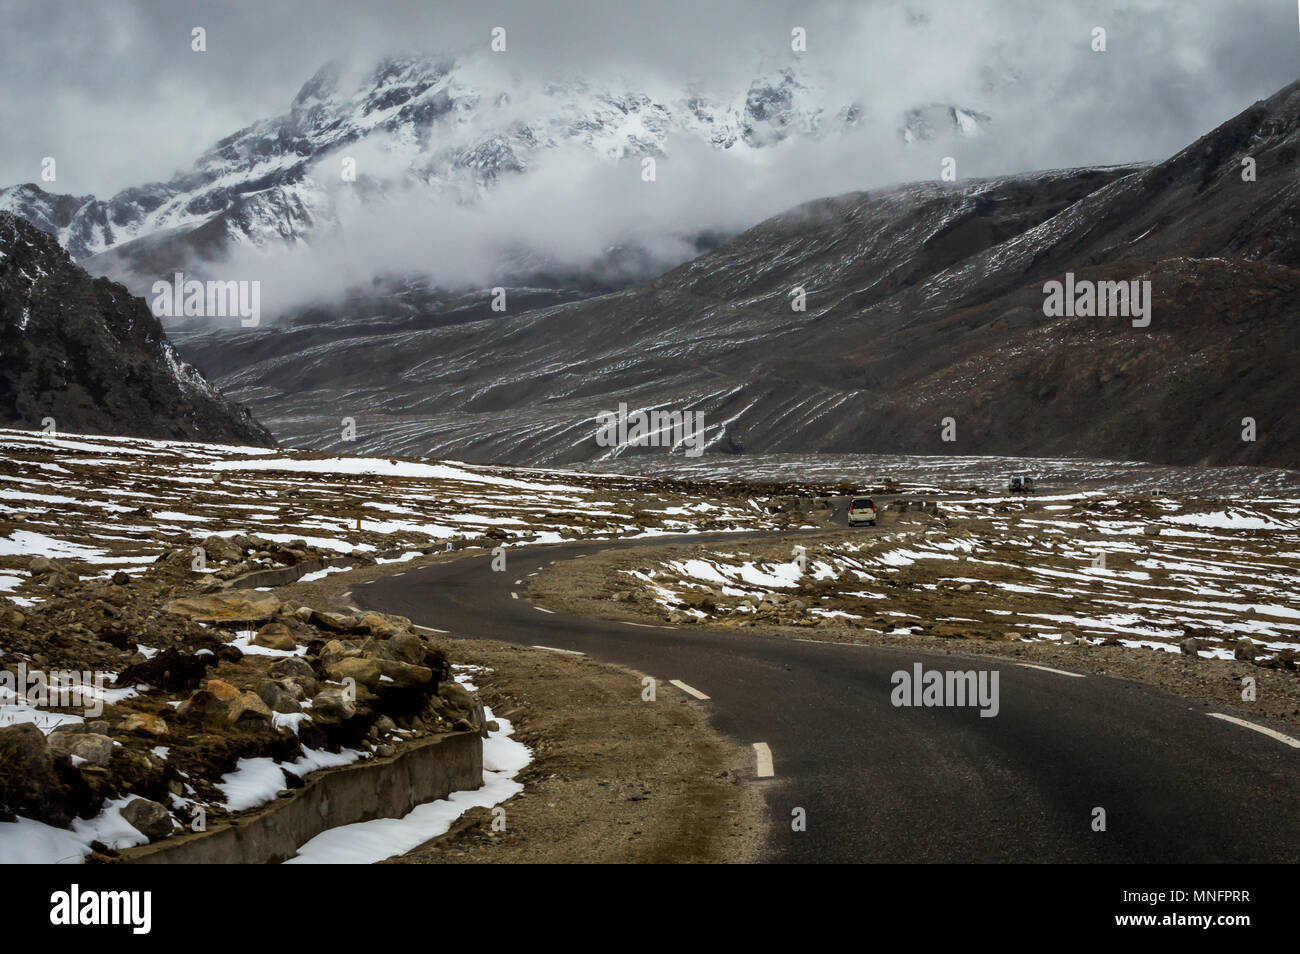 Lachen, Sikkim, India - 30 April, 2018: A SUV travelling through the himalayan roads of North Sikkim near Gurudongmar Lake at 17000 ft altitude, Lache Stock Photo